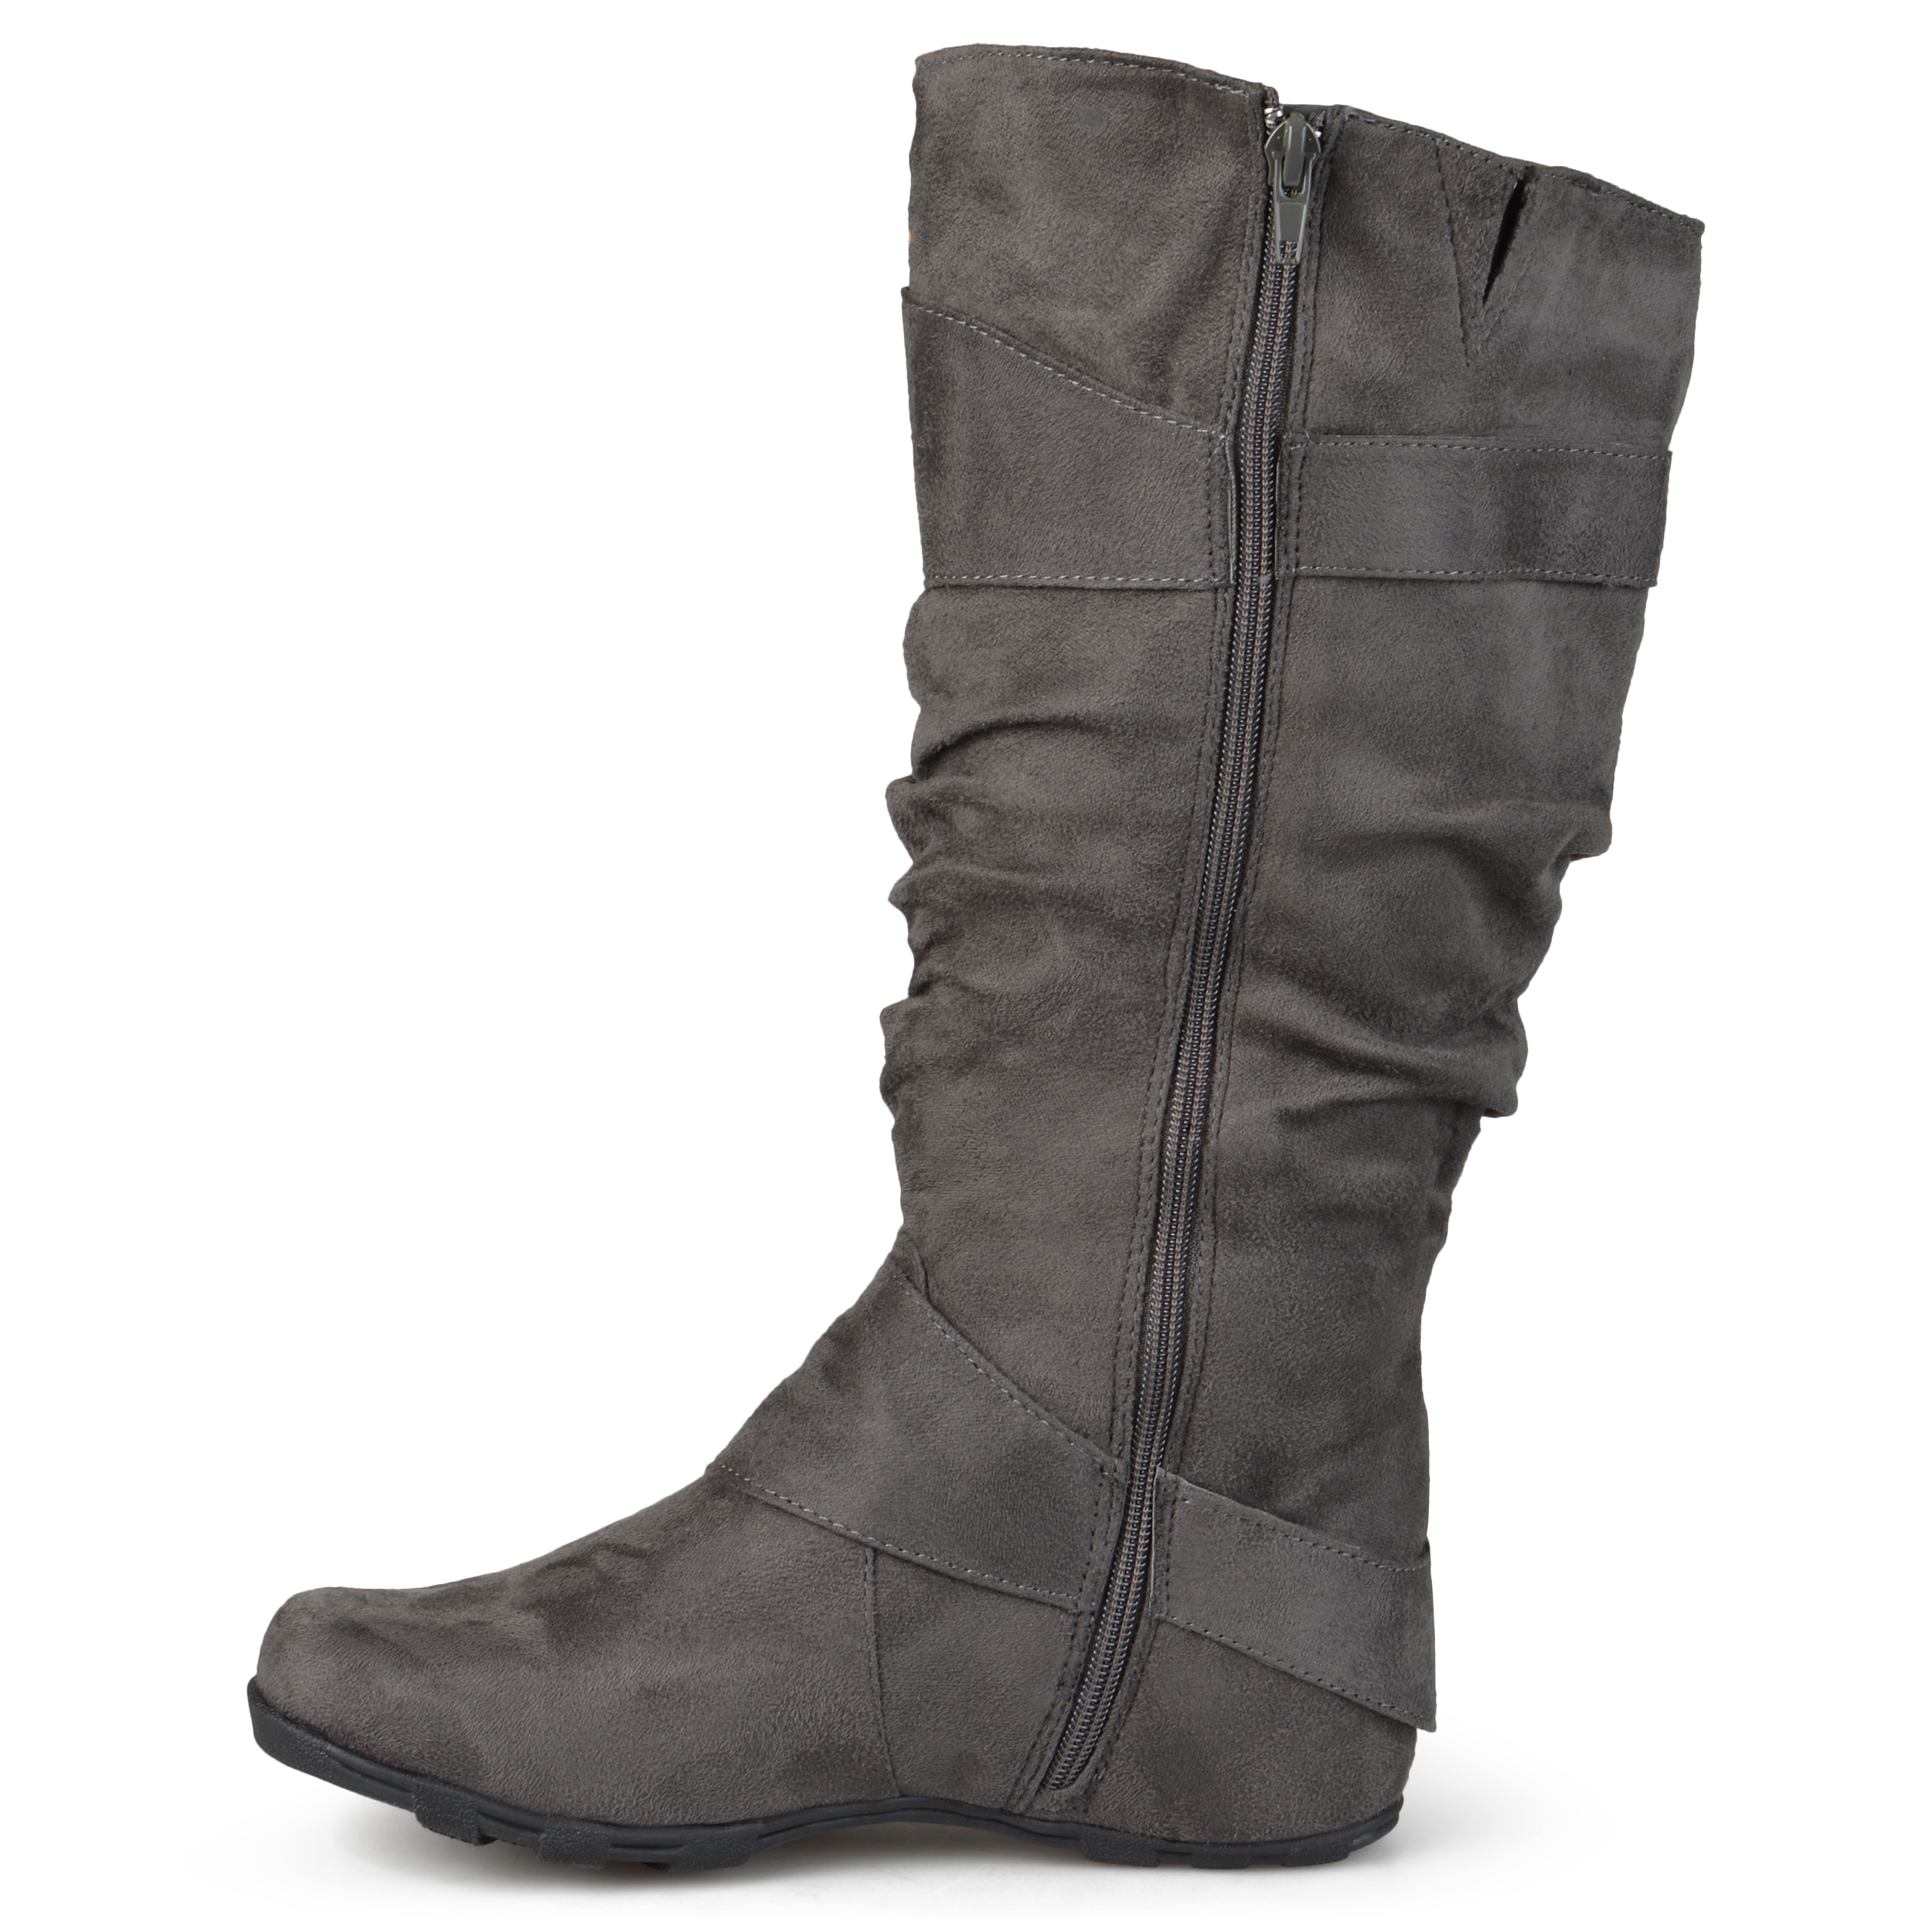 Women's Slouchy Wide Calf Boots - image 3 of 8